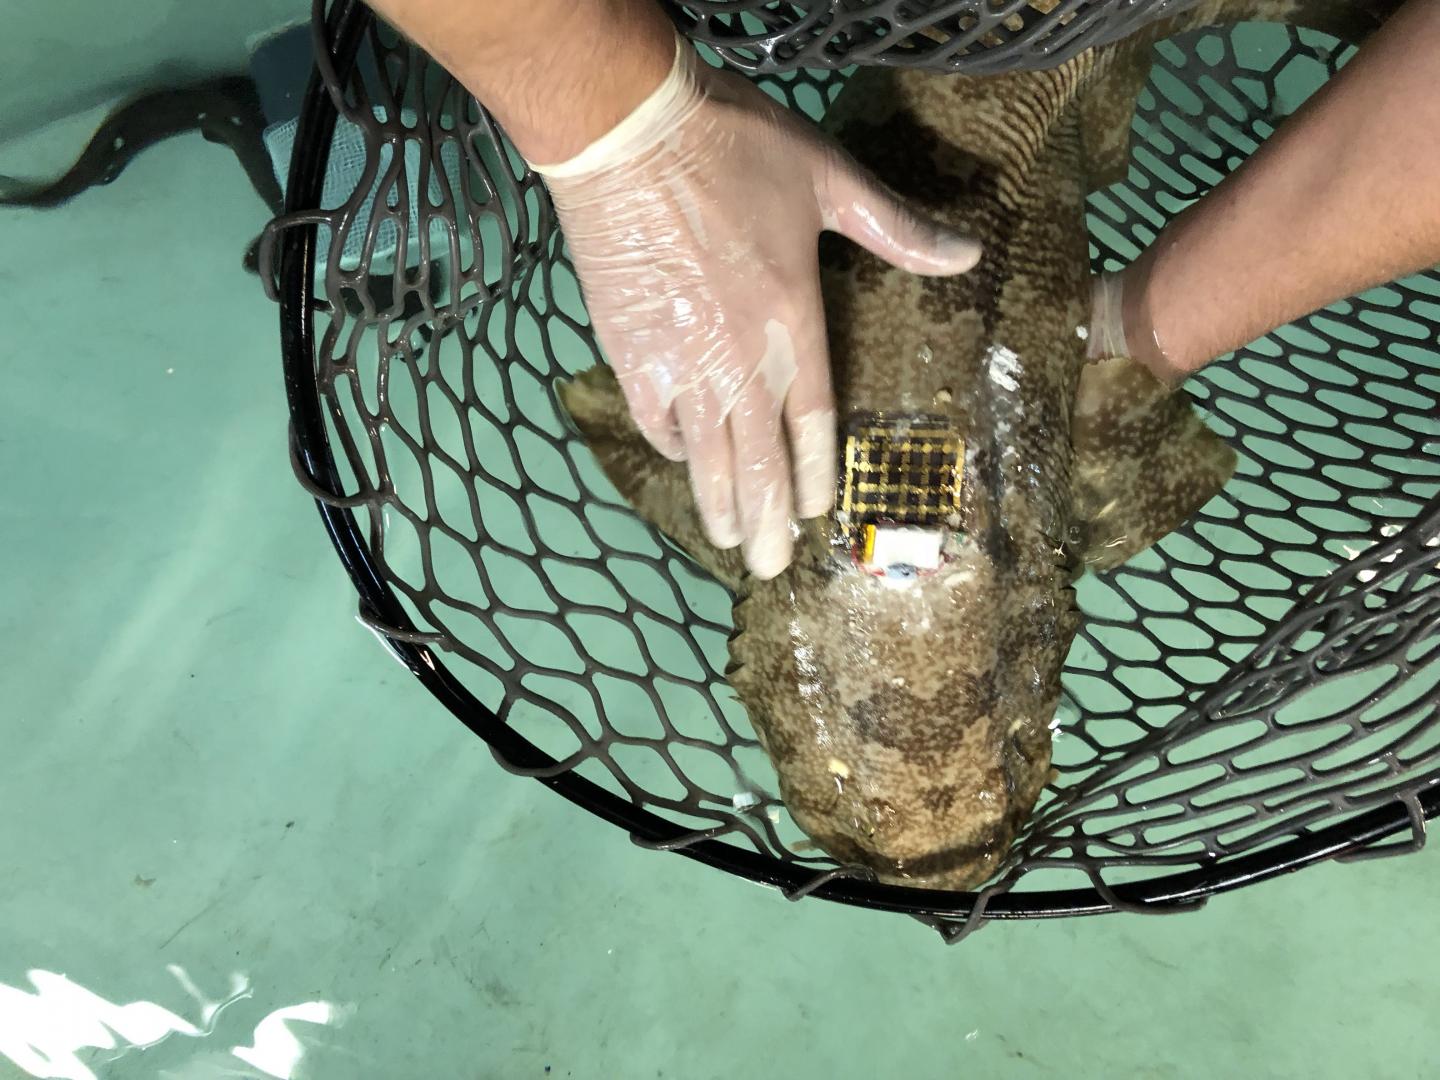 Marine Skin has been shown to be suitable for tagging a wide range of sea creatures. (Source: 2018 KAUST)